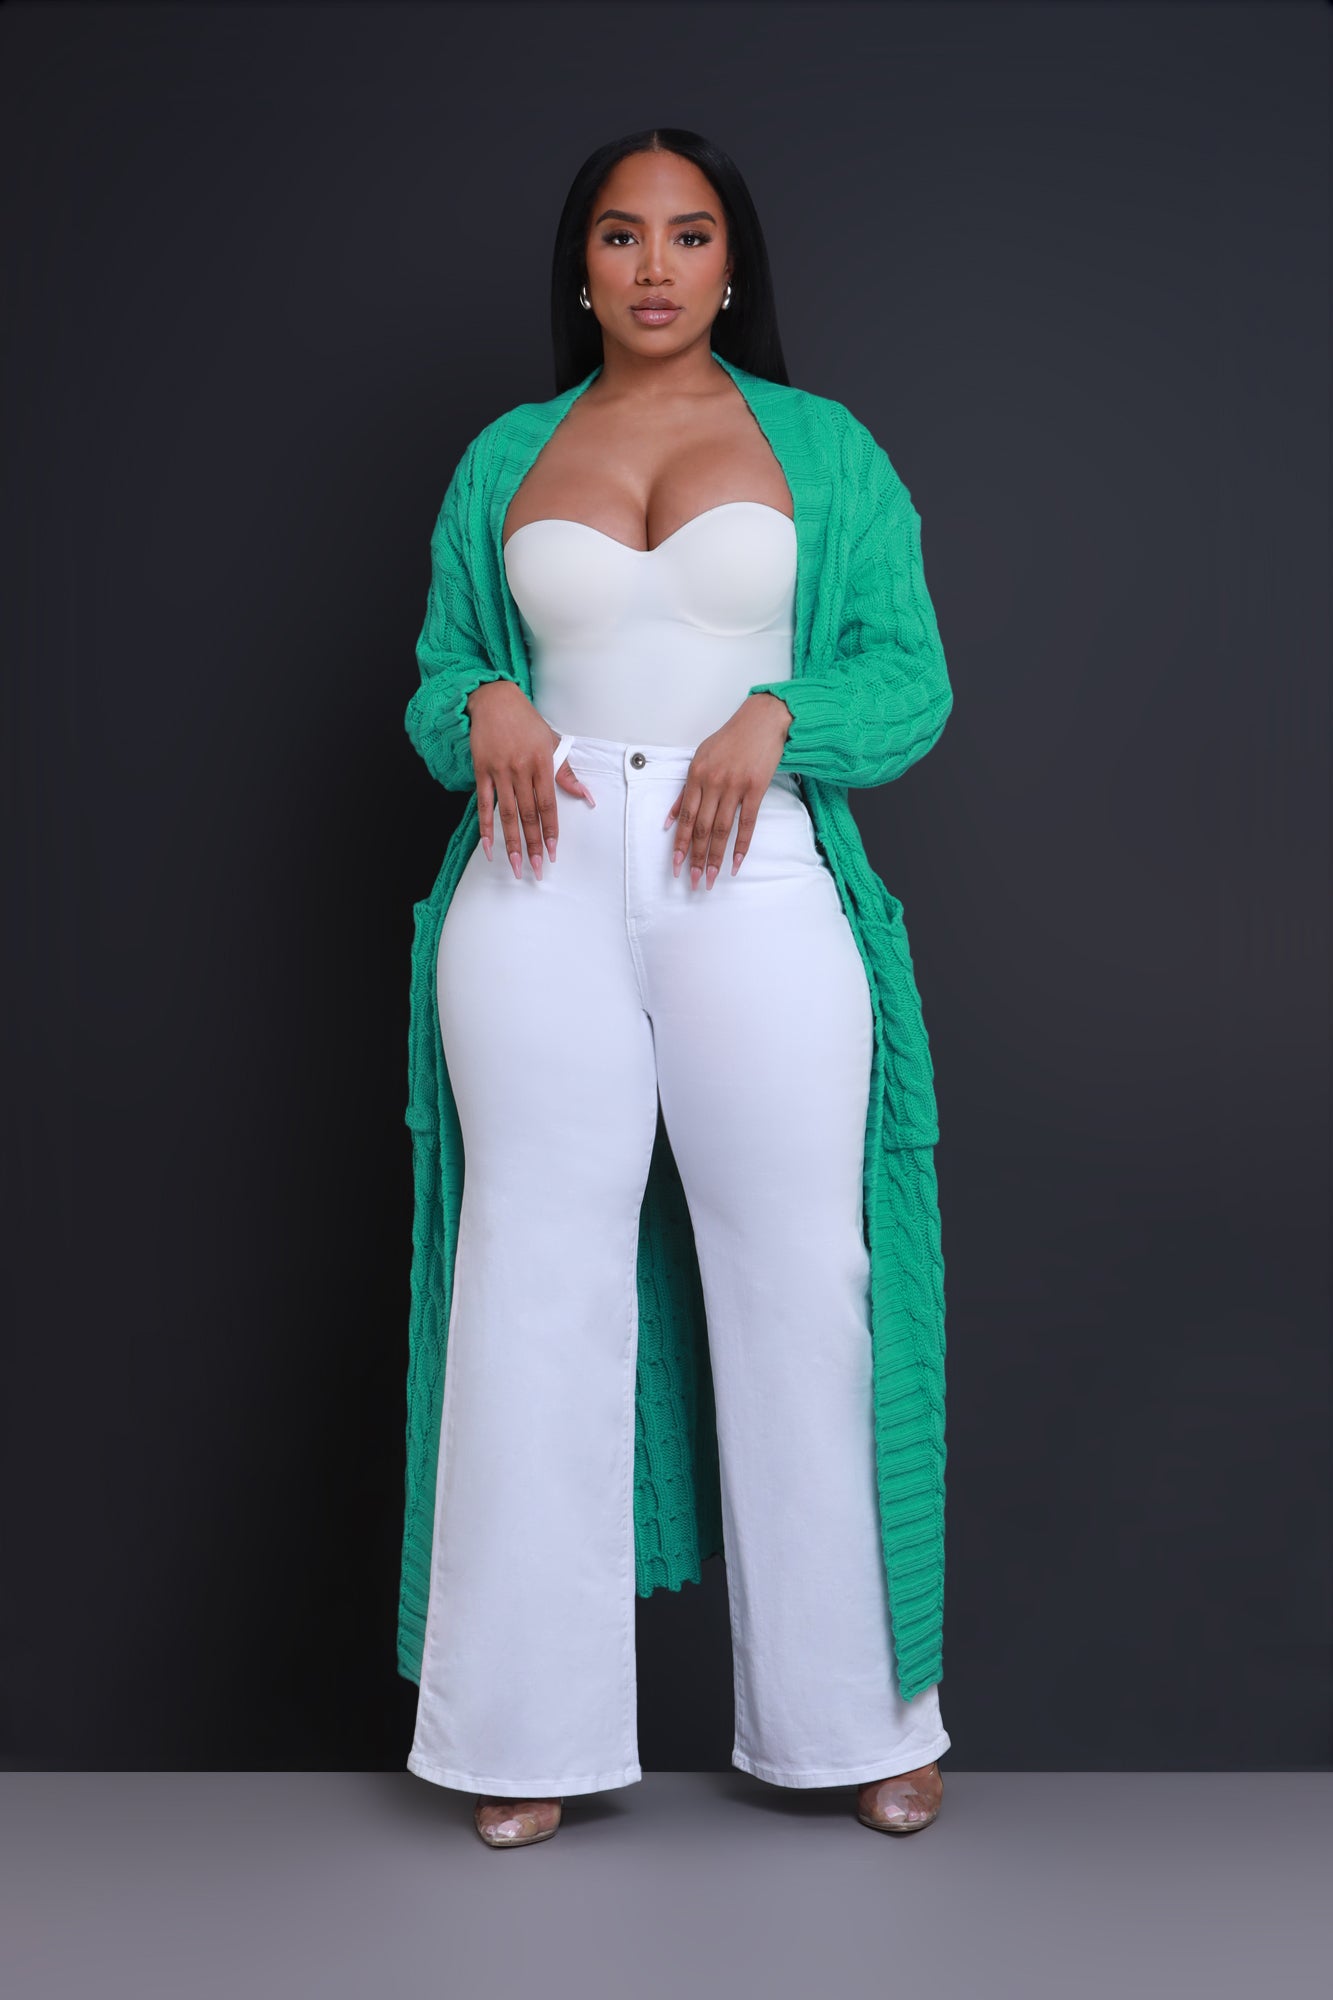 Let's Meet High Rise Wide Flare Jeans - White - Swank A Posh